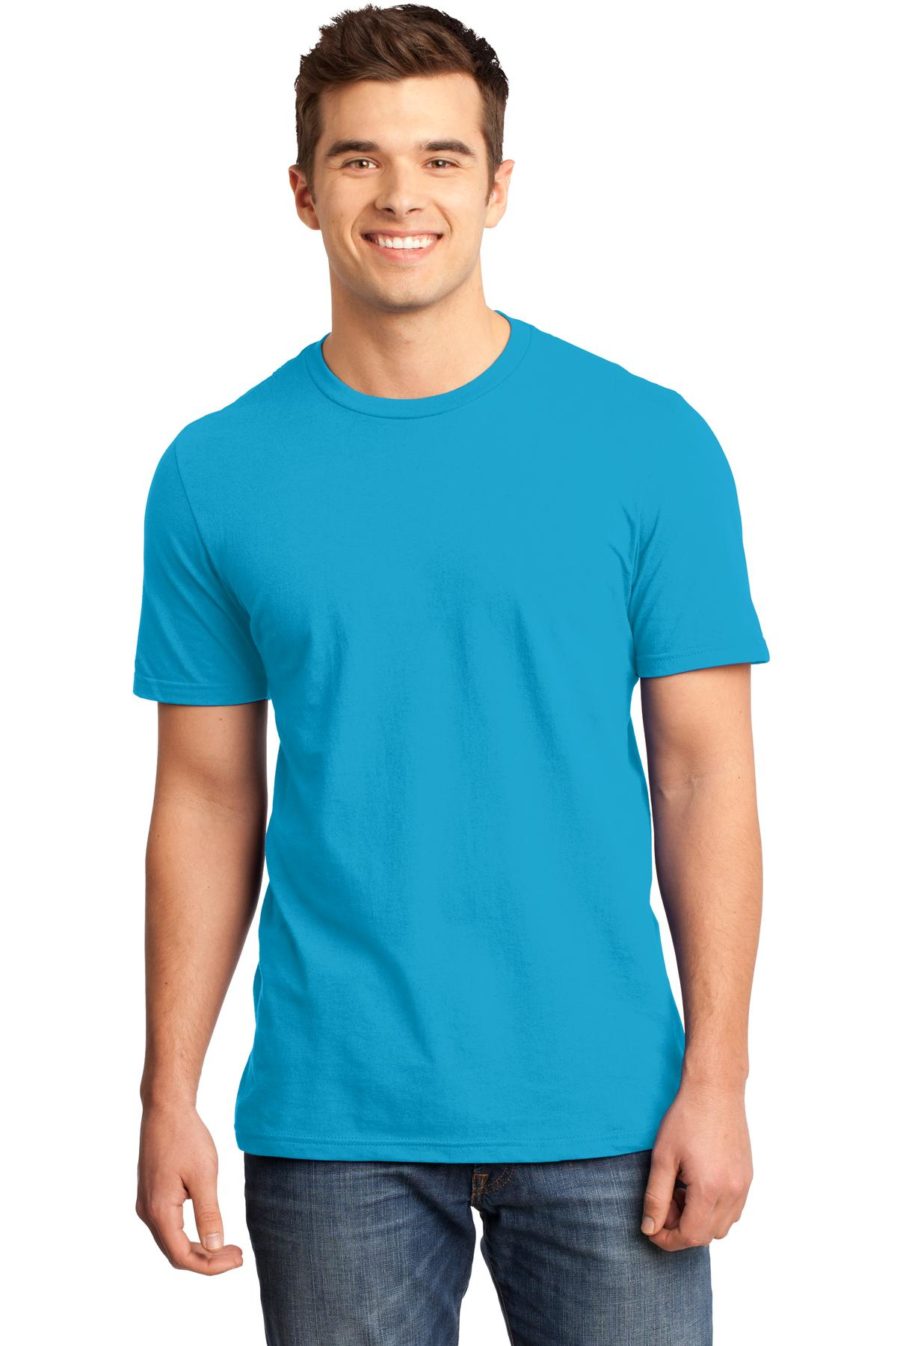 The Very Important tee from District in turquoise